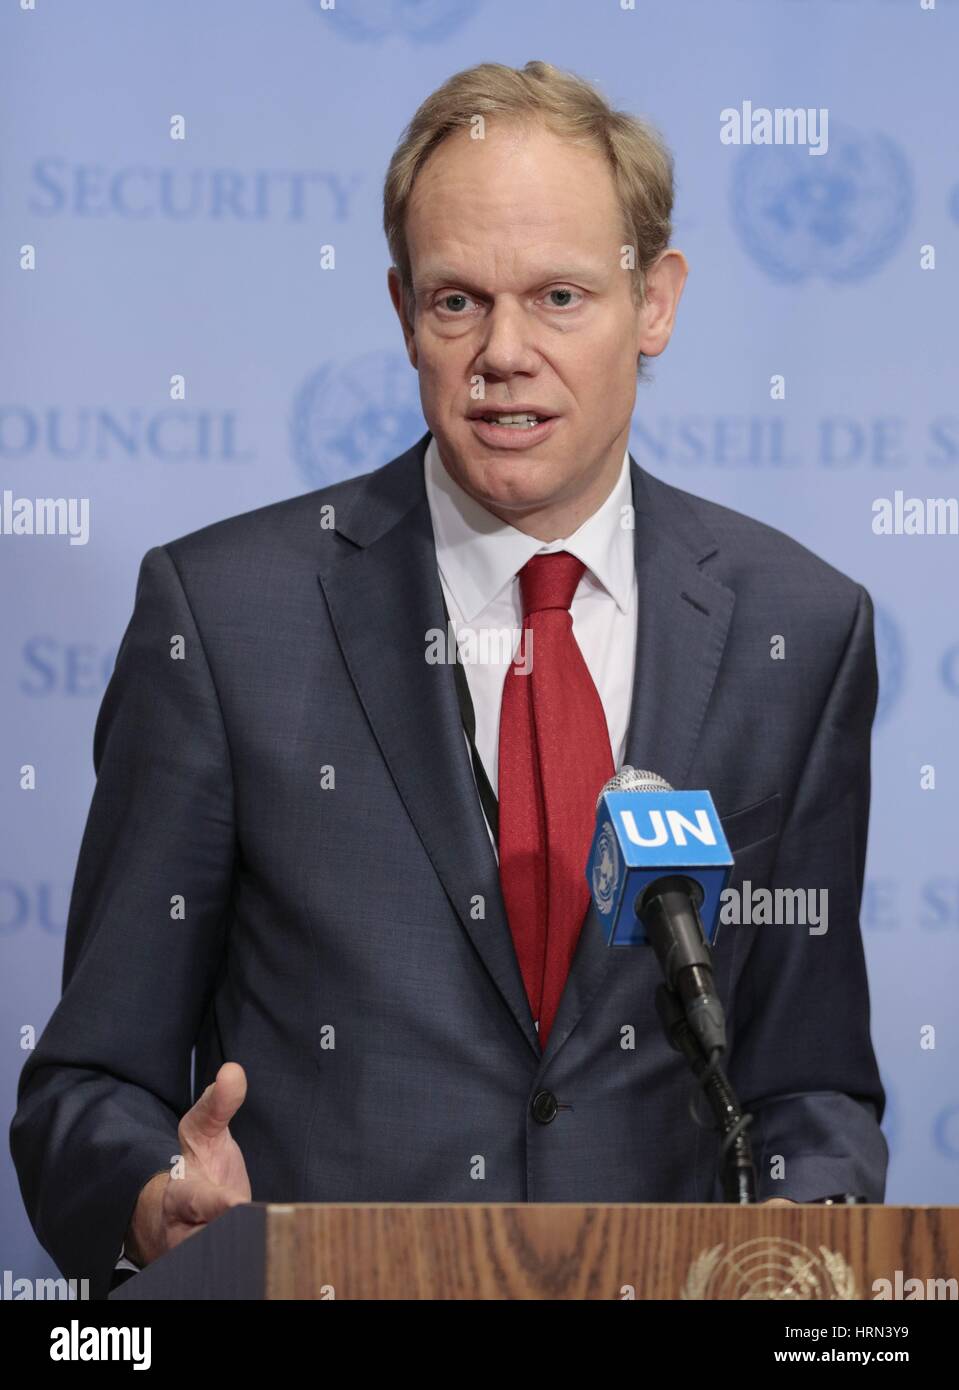 United Nations, New York, USA, 28 February 2017 - Ambassador Matthew Rycroft Permanent Representative of UK to the UN after the Russian Security Council Veto on the Syrian Chemical Weapons attack on there Civilian Population today at the UN Headquarters in New York. Photo: Luiz Rampelotto/EuropaNewswire | usage worldwide Stock Photo